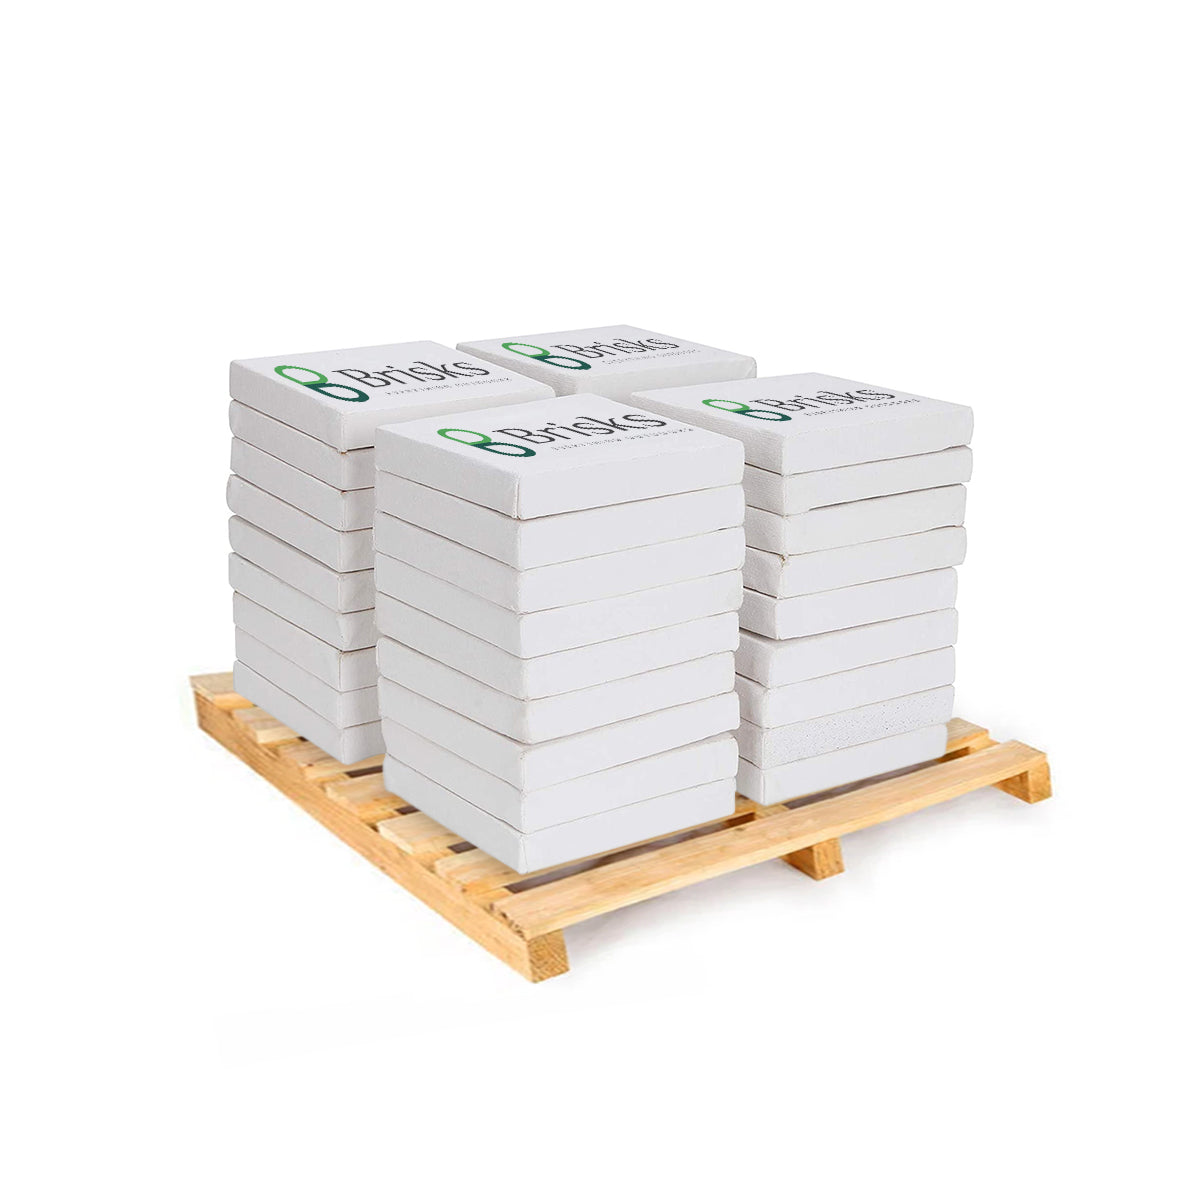 A wooden pallet holds three stacks of white rectangular bricks branded with "General Purpose Concrete" on top, featuring a blue and green logo. The bricks are neatly arranged, resembling the uniformity you'd expect from Brisks General Purpose Concrete blocks. The background is plain white.